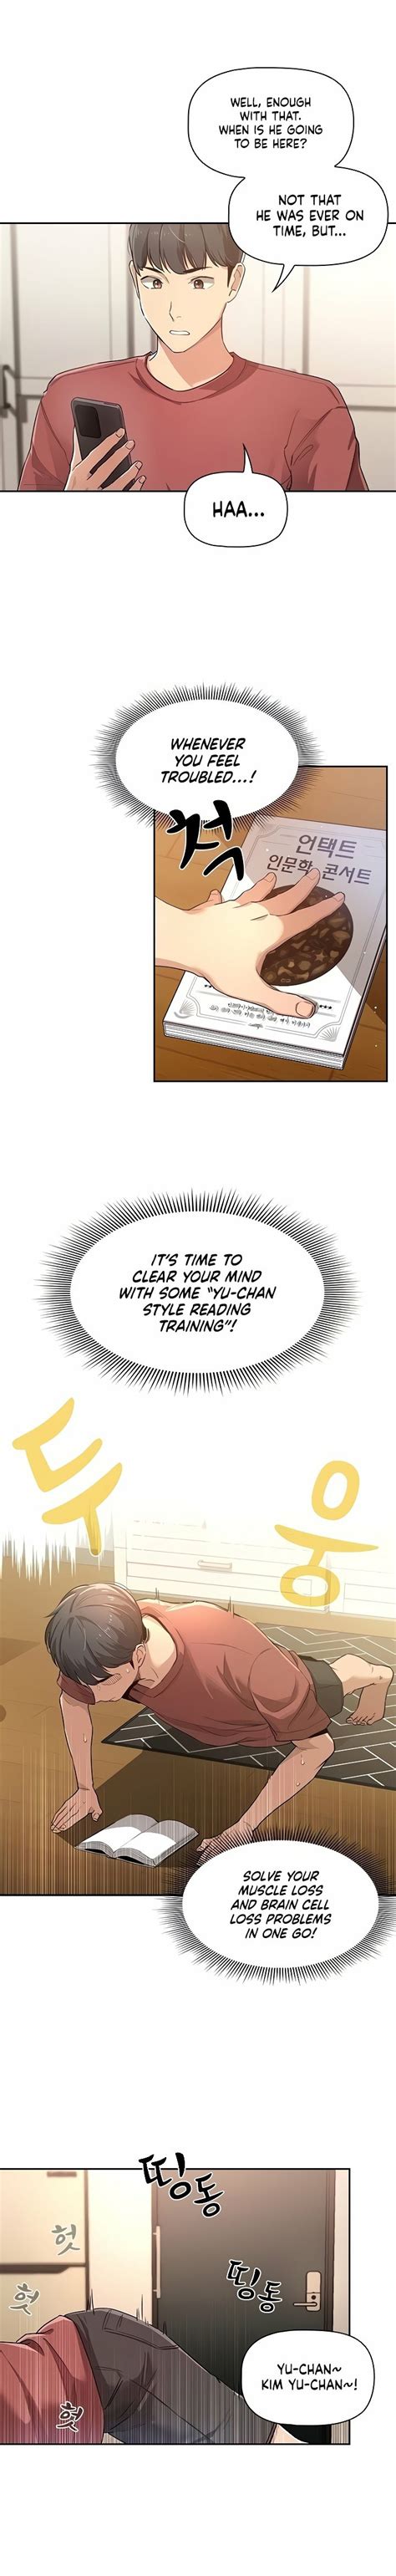 Private Tutoring In These Trying Times Chap 01 Hotmod Club